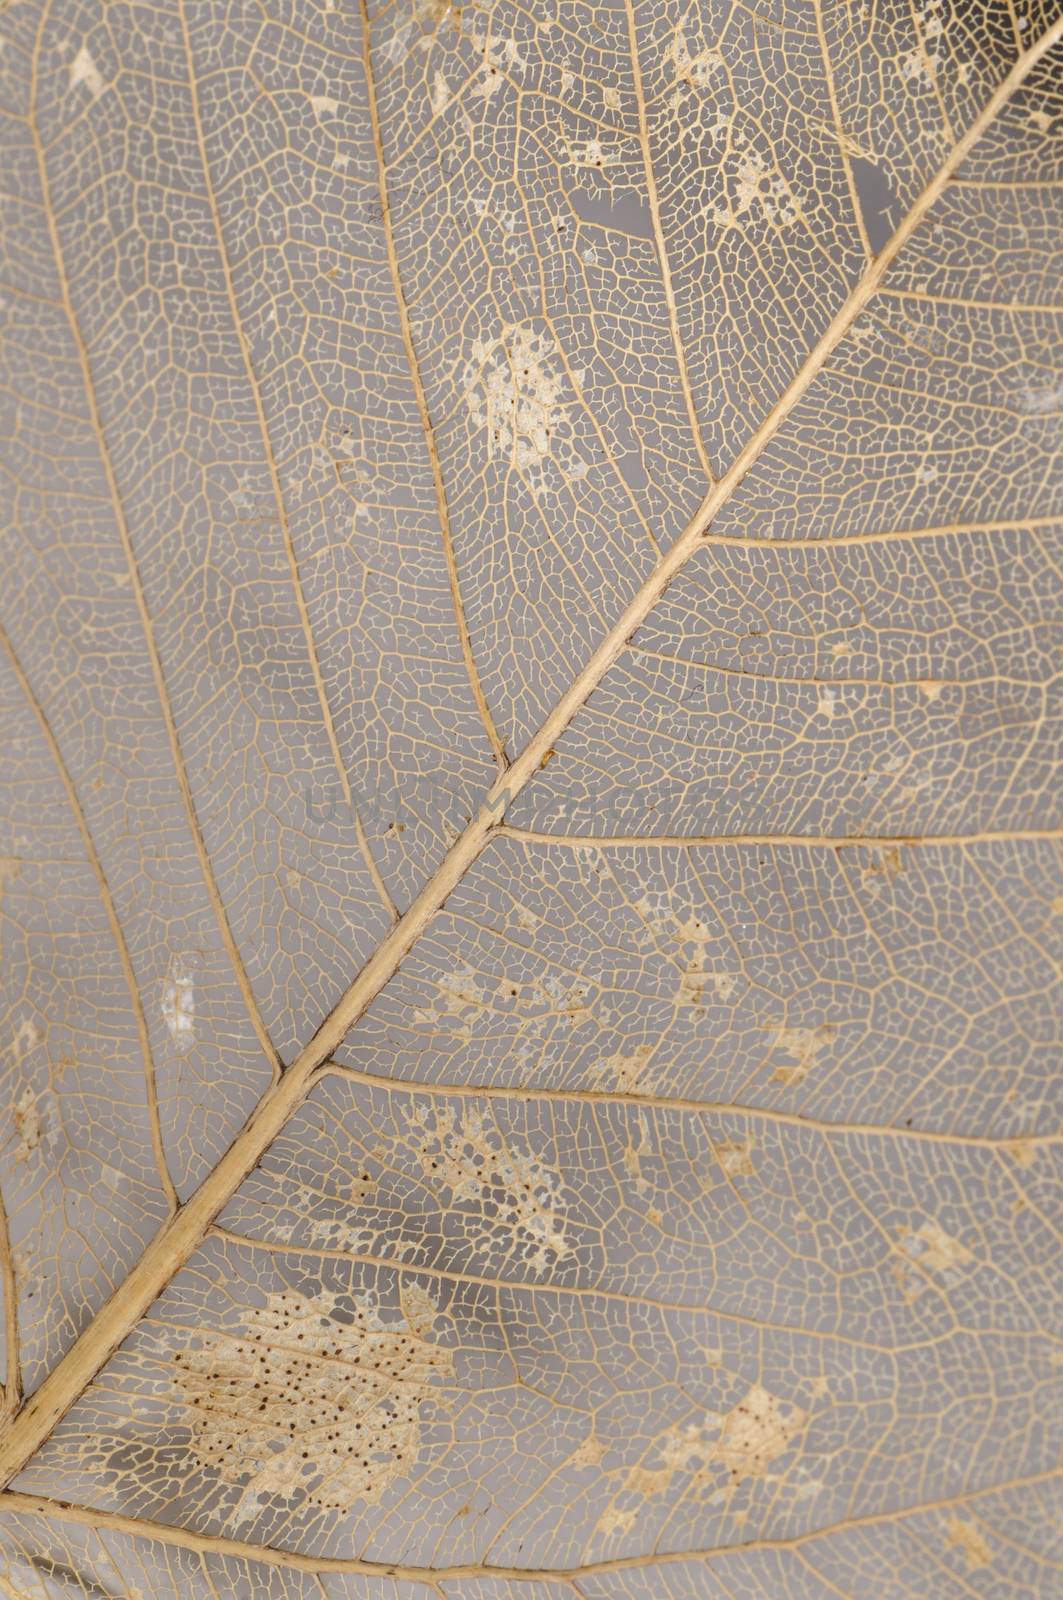 Abstract detail of dried leaf pattern with veins